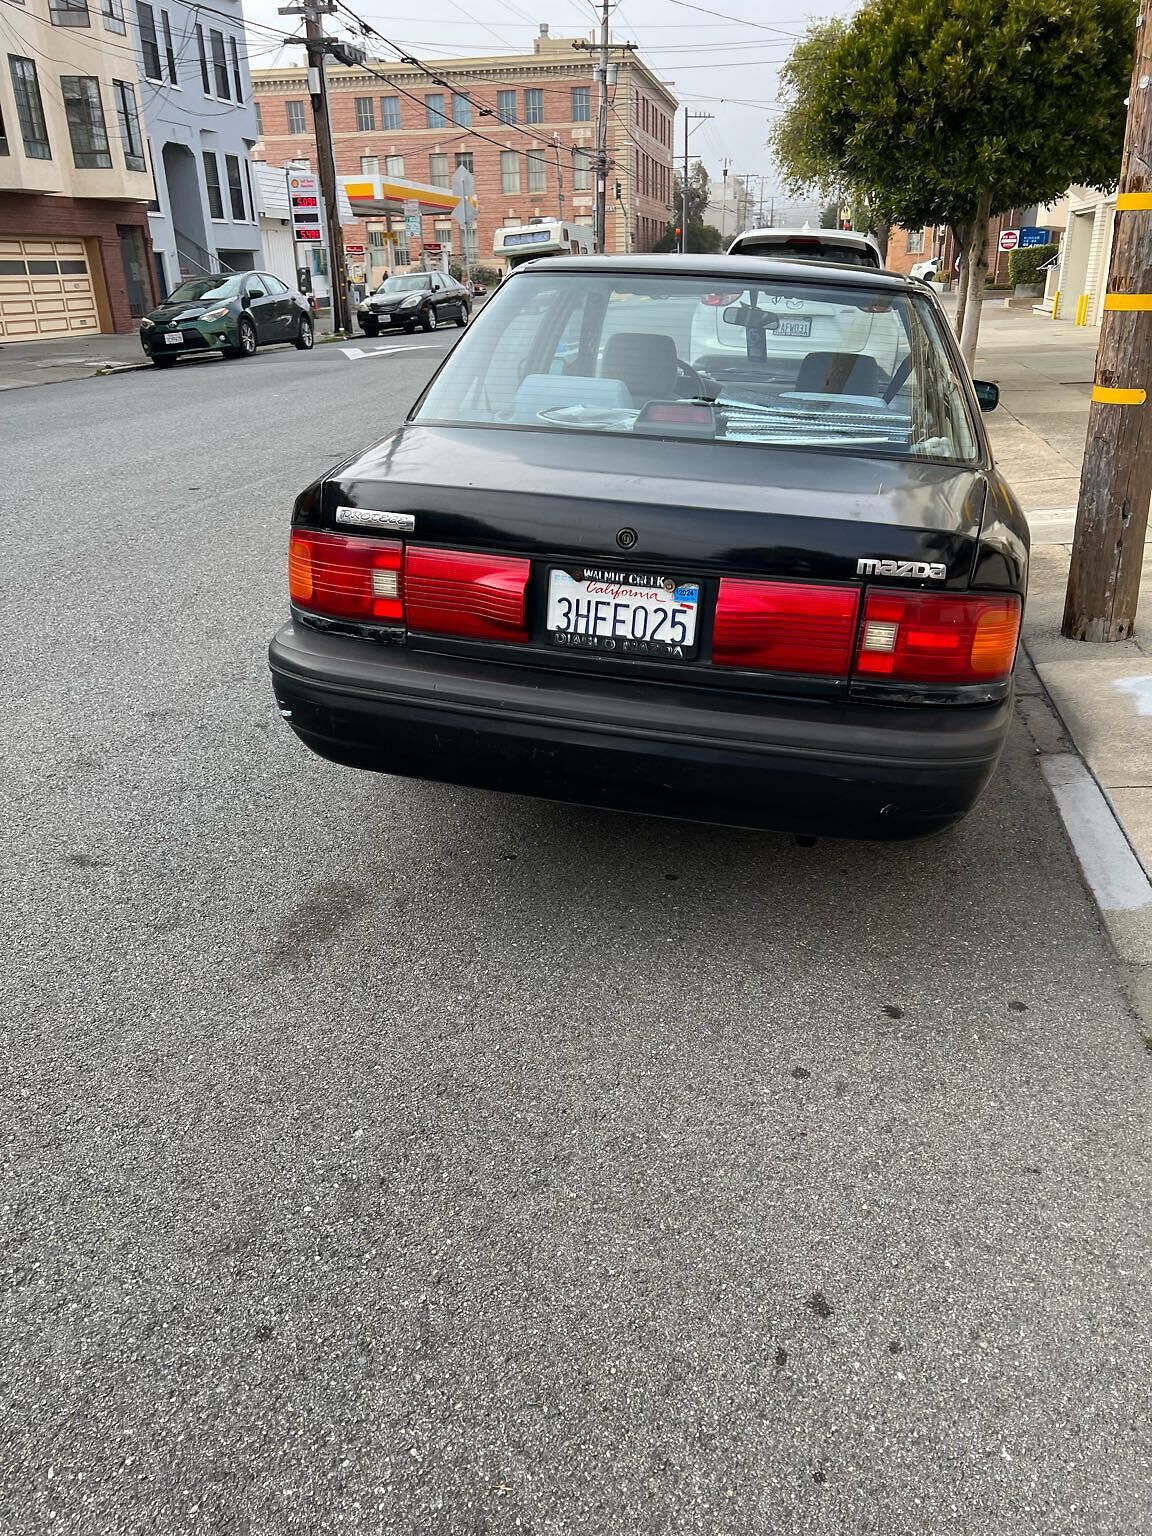 Photo of car in the street with license plate 3HFE025 in California